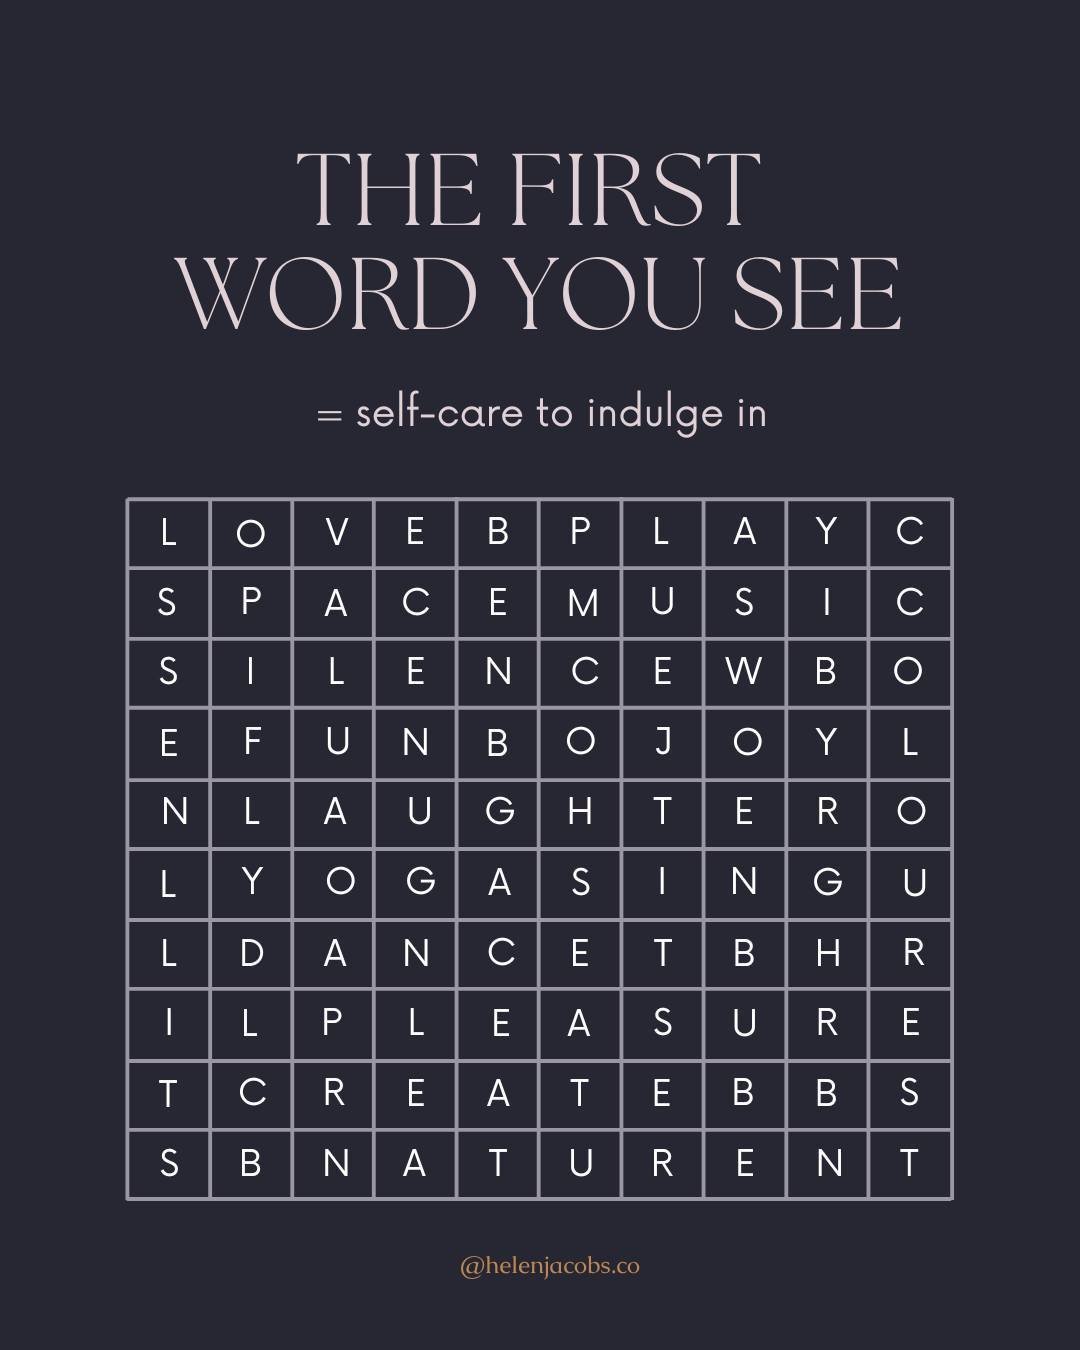 Let's have a bit of fun... what's the first word you see? Tell me in the comments. ⁠
⁠
And, because we're in a &quot;pleasure portal&quot; -- a four-month energy cycle asking us to indulge in self-care, soul-care and spirit-care... I challenge you to